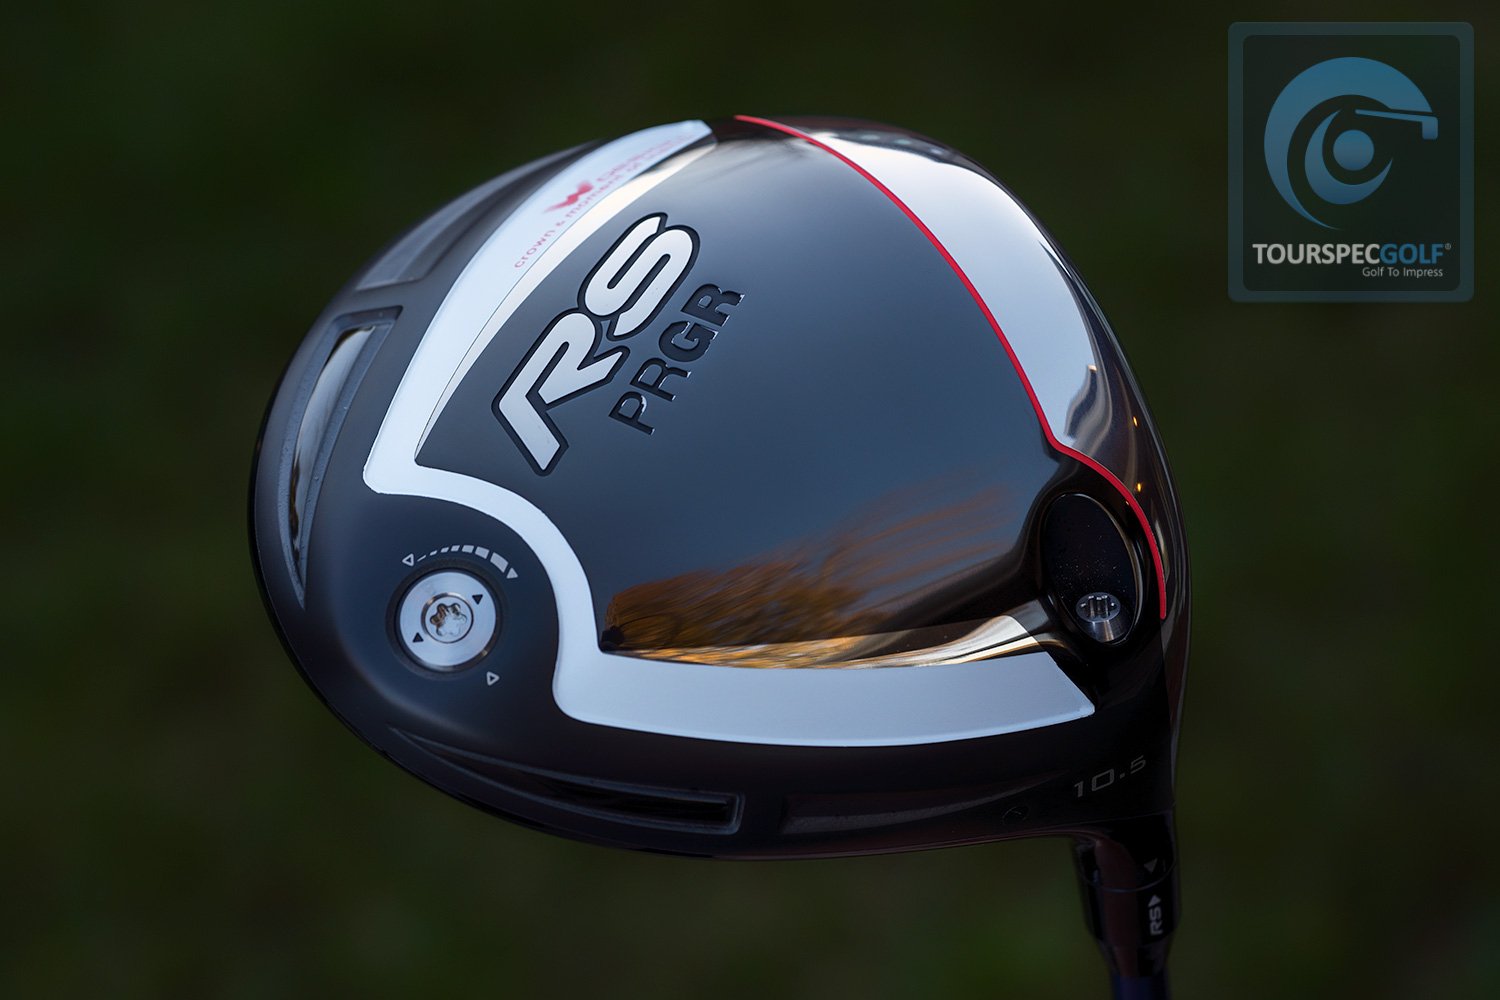 2018 PRGR RS Driver User Review - TourSpecGolf Golf Blog